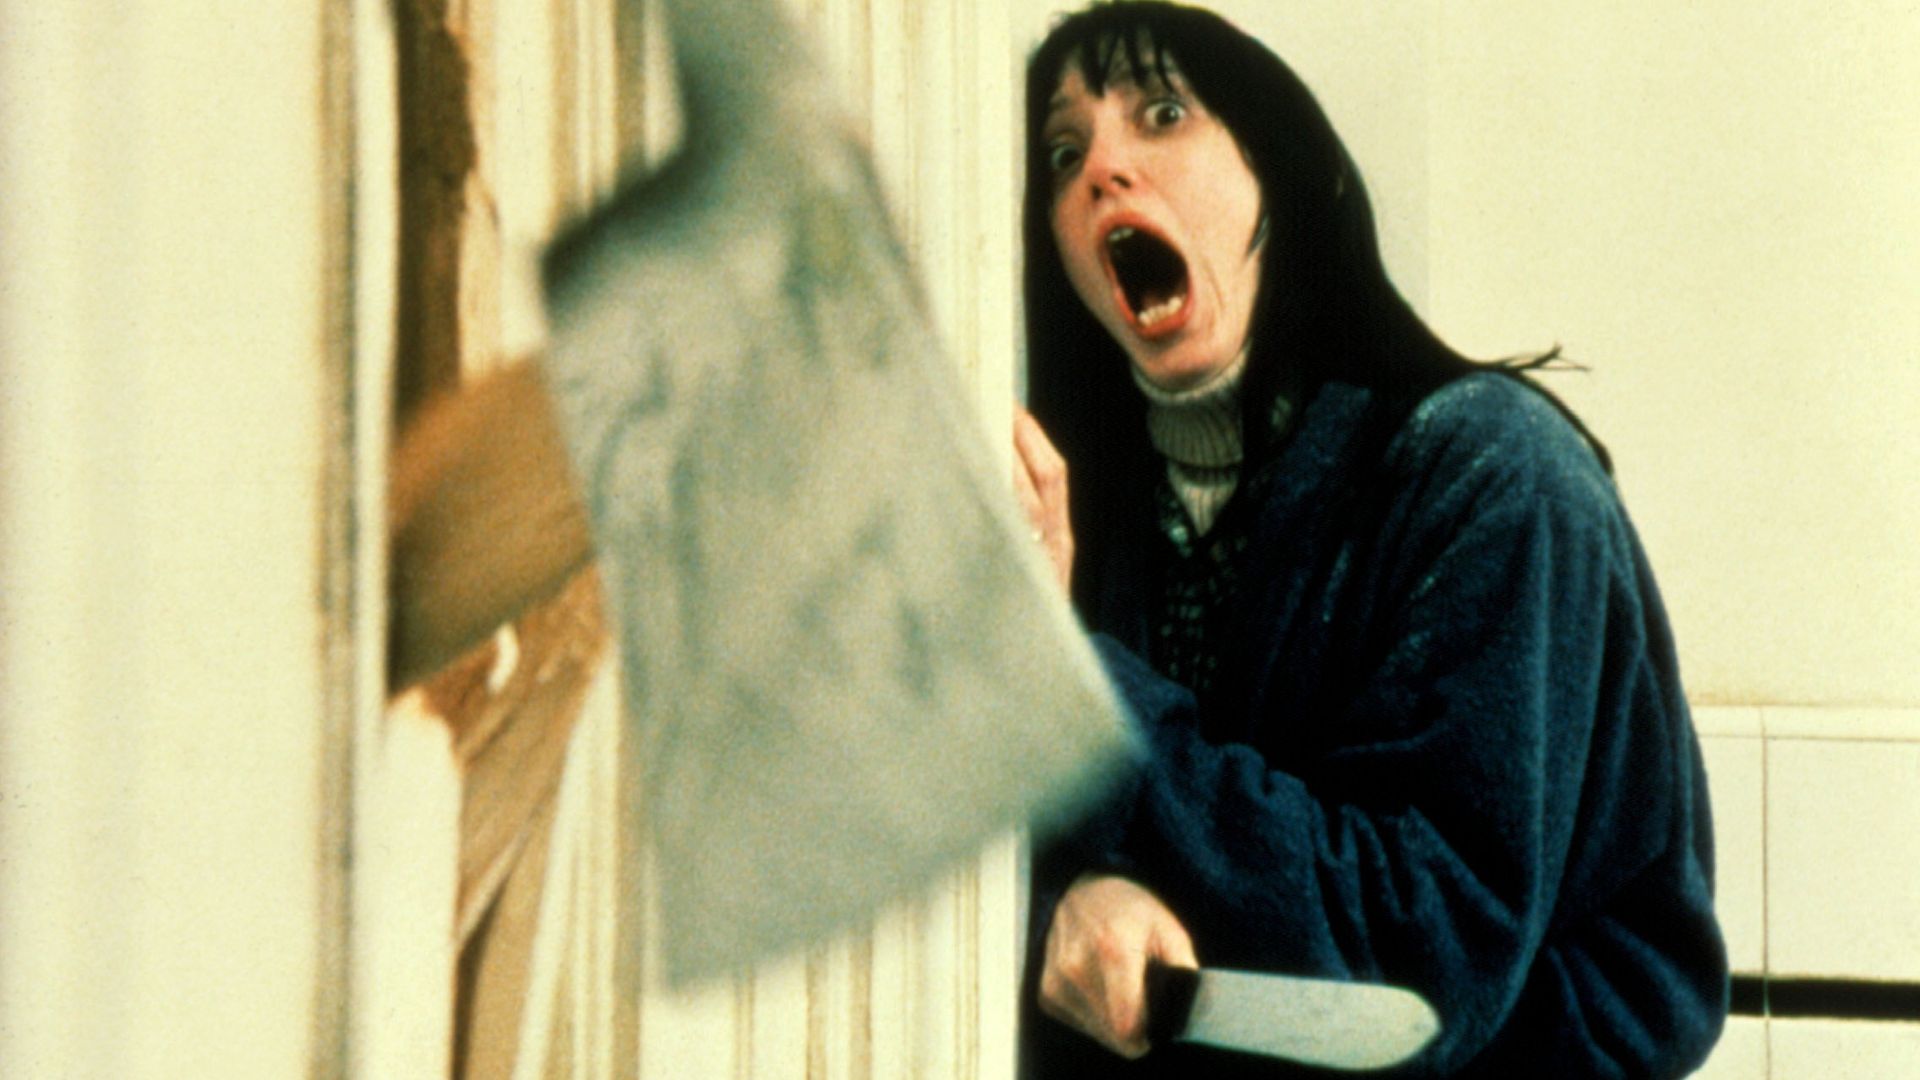 The Shining actress dies 